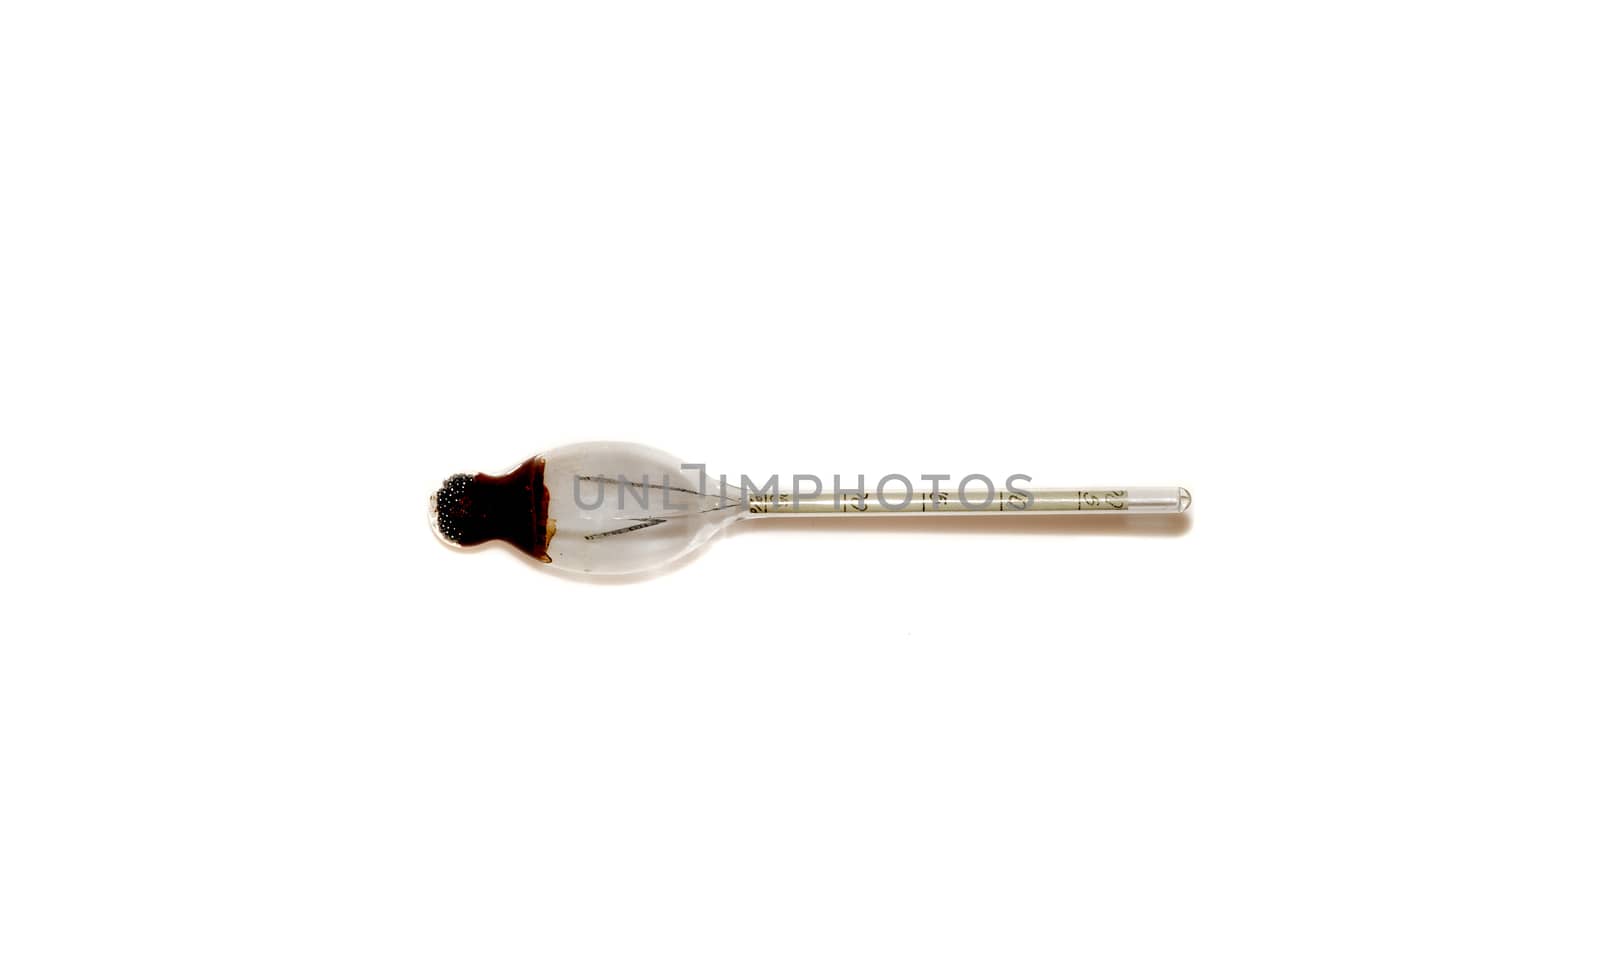 hydrometer / sugar meter / determines the Specific Gravity of Liquids isolated on white background